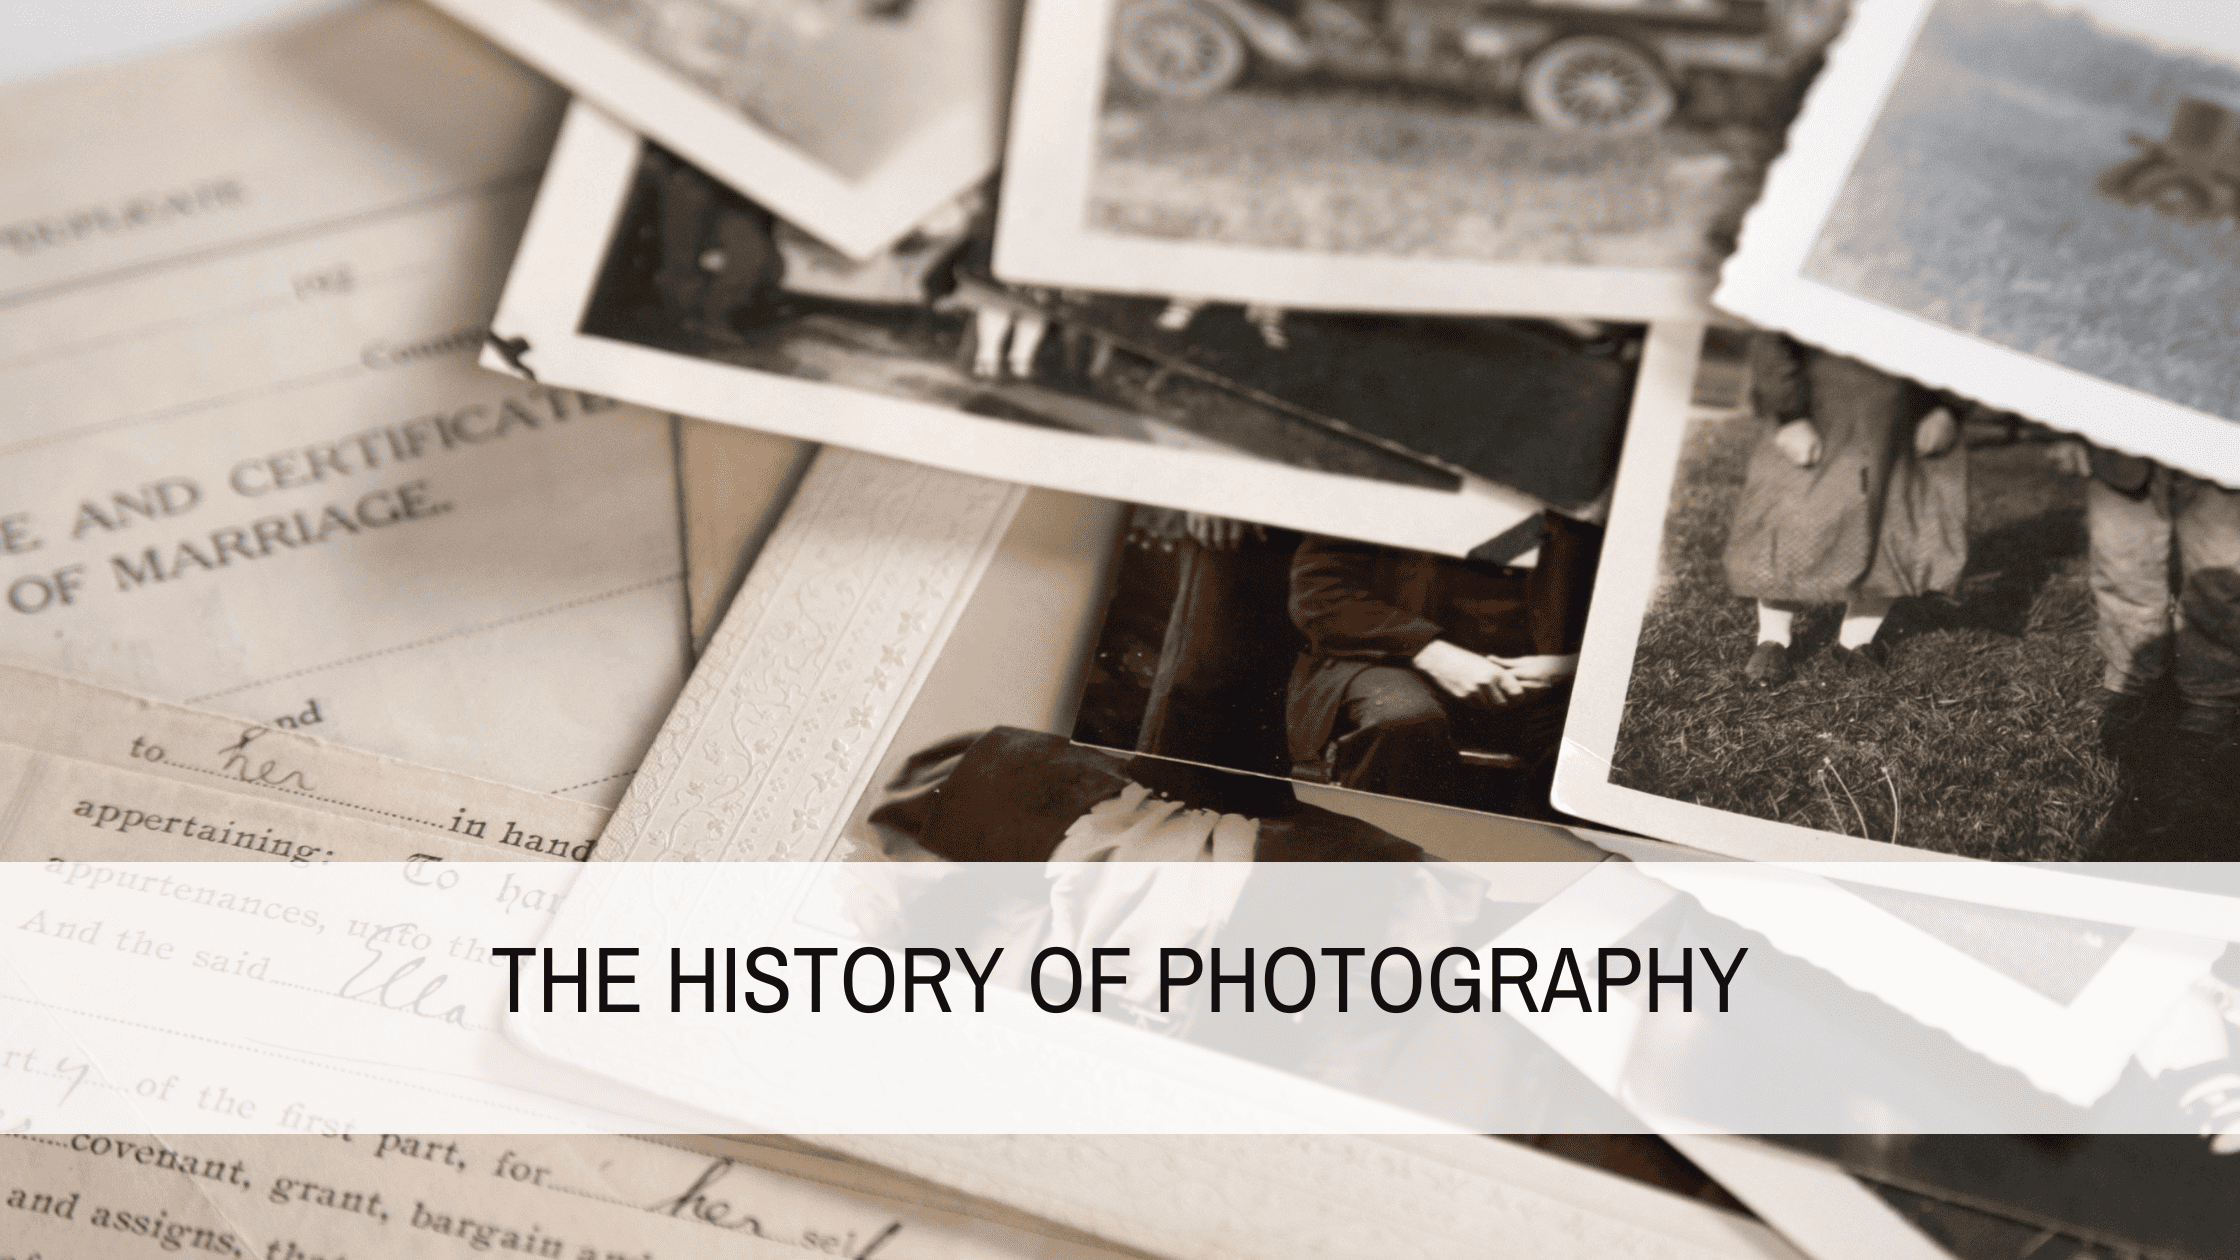 The History of Photography